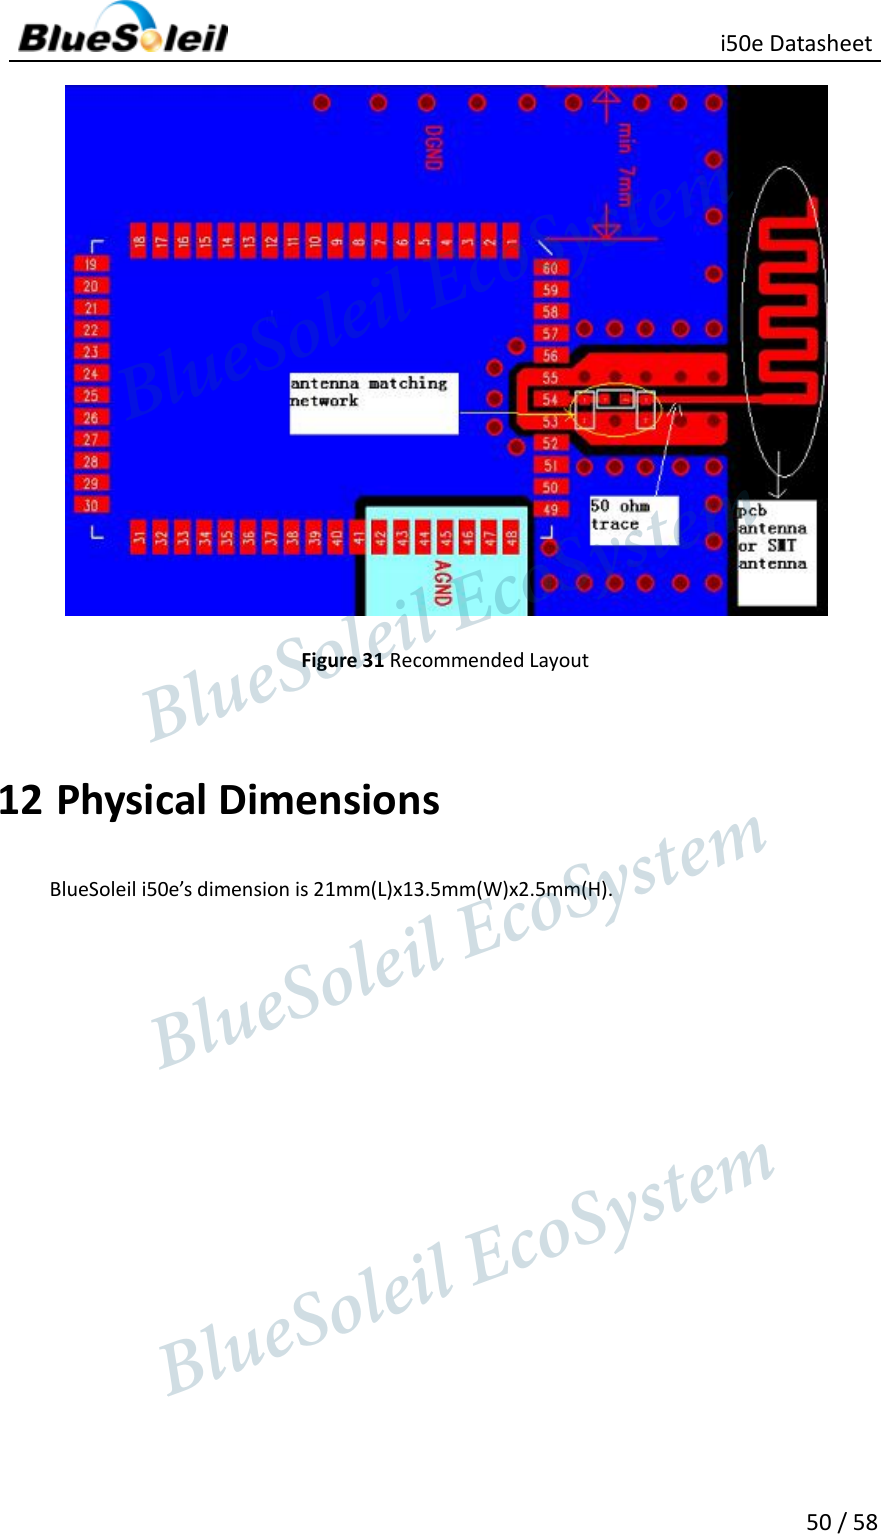                                                   i50e Datasheet 50 / 58  Figure 31 Recommended Layout  12 Physical Dimensions BlueSoleil i50e’s dimension is 21mm(L)x13.5mm(W)x2.5mm(H).                  BlueSoleil EcoSystem            BlueSoleil EcoSystem      BlueSoleil EcoSystemBlueSoleil EcoSystem